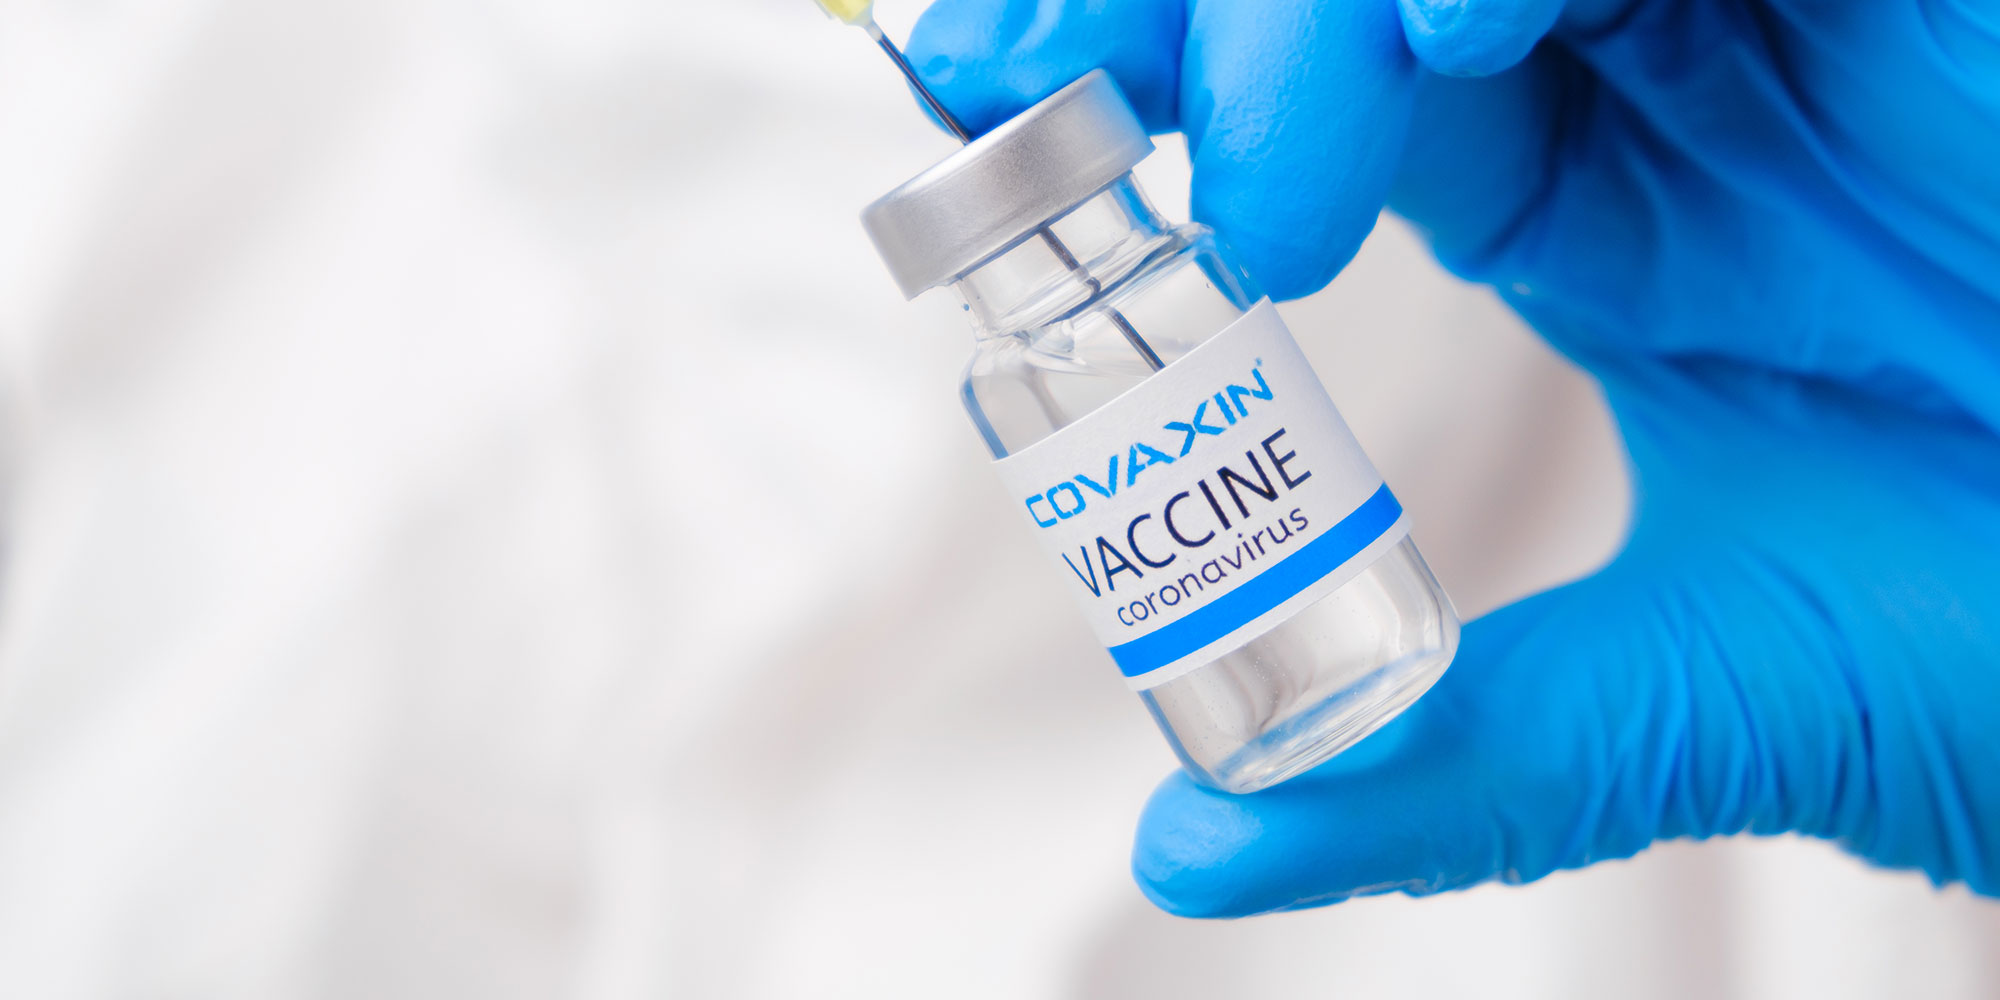 India's “Covaxin” vaccine shows high efficacy against COVID-19 infections  in phase 3 trial | Gavi, the Vaccine Alliance